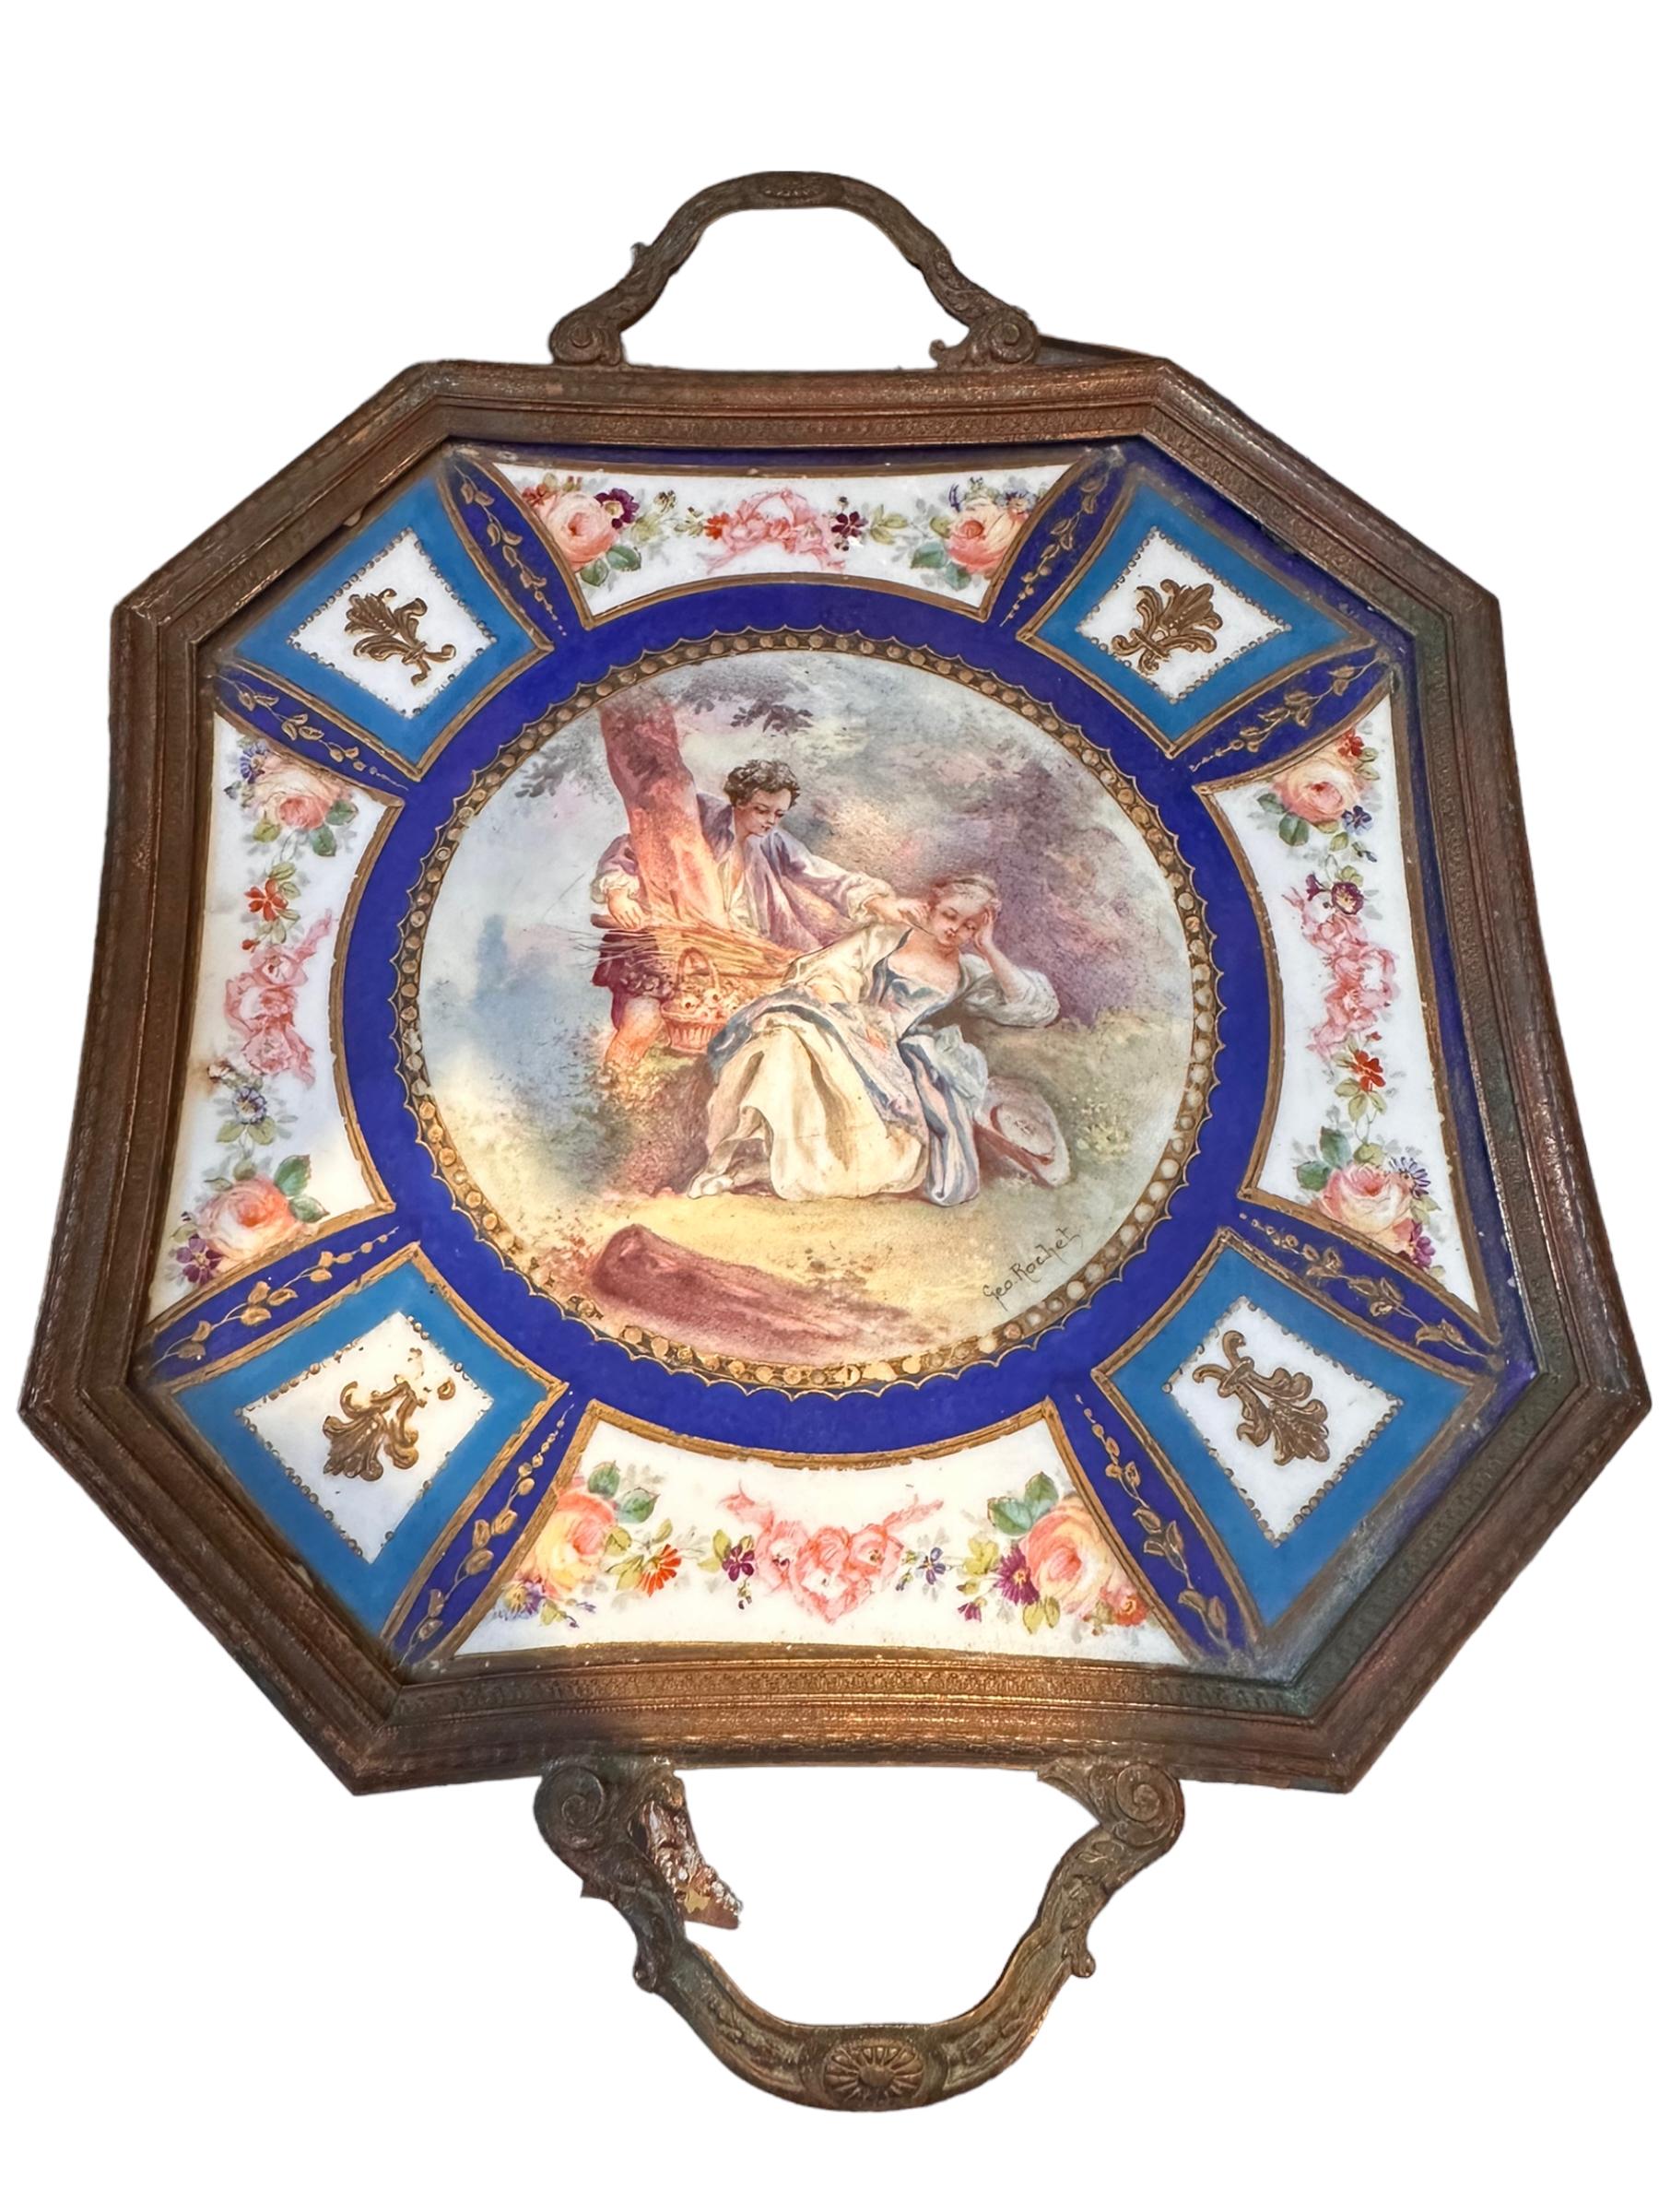 This piece is over 150 years old. Made by the famous Sevres Porcelain, this brand at one time created pieces for Marie Antoinette and Napoleon. In great condition for the age with a chipped edge covered by the brass tray surround, some loss to